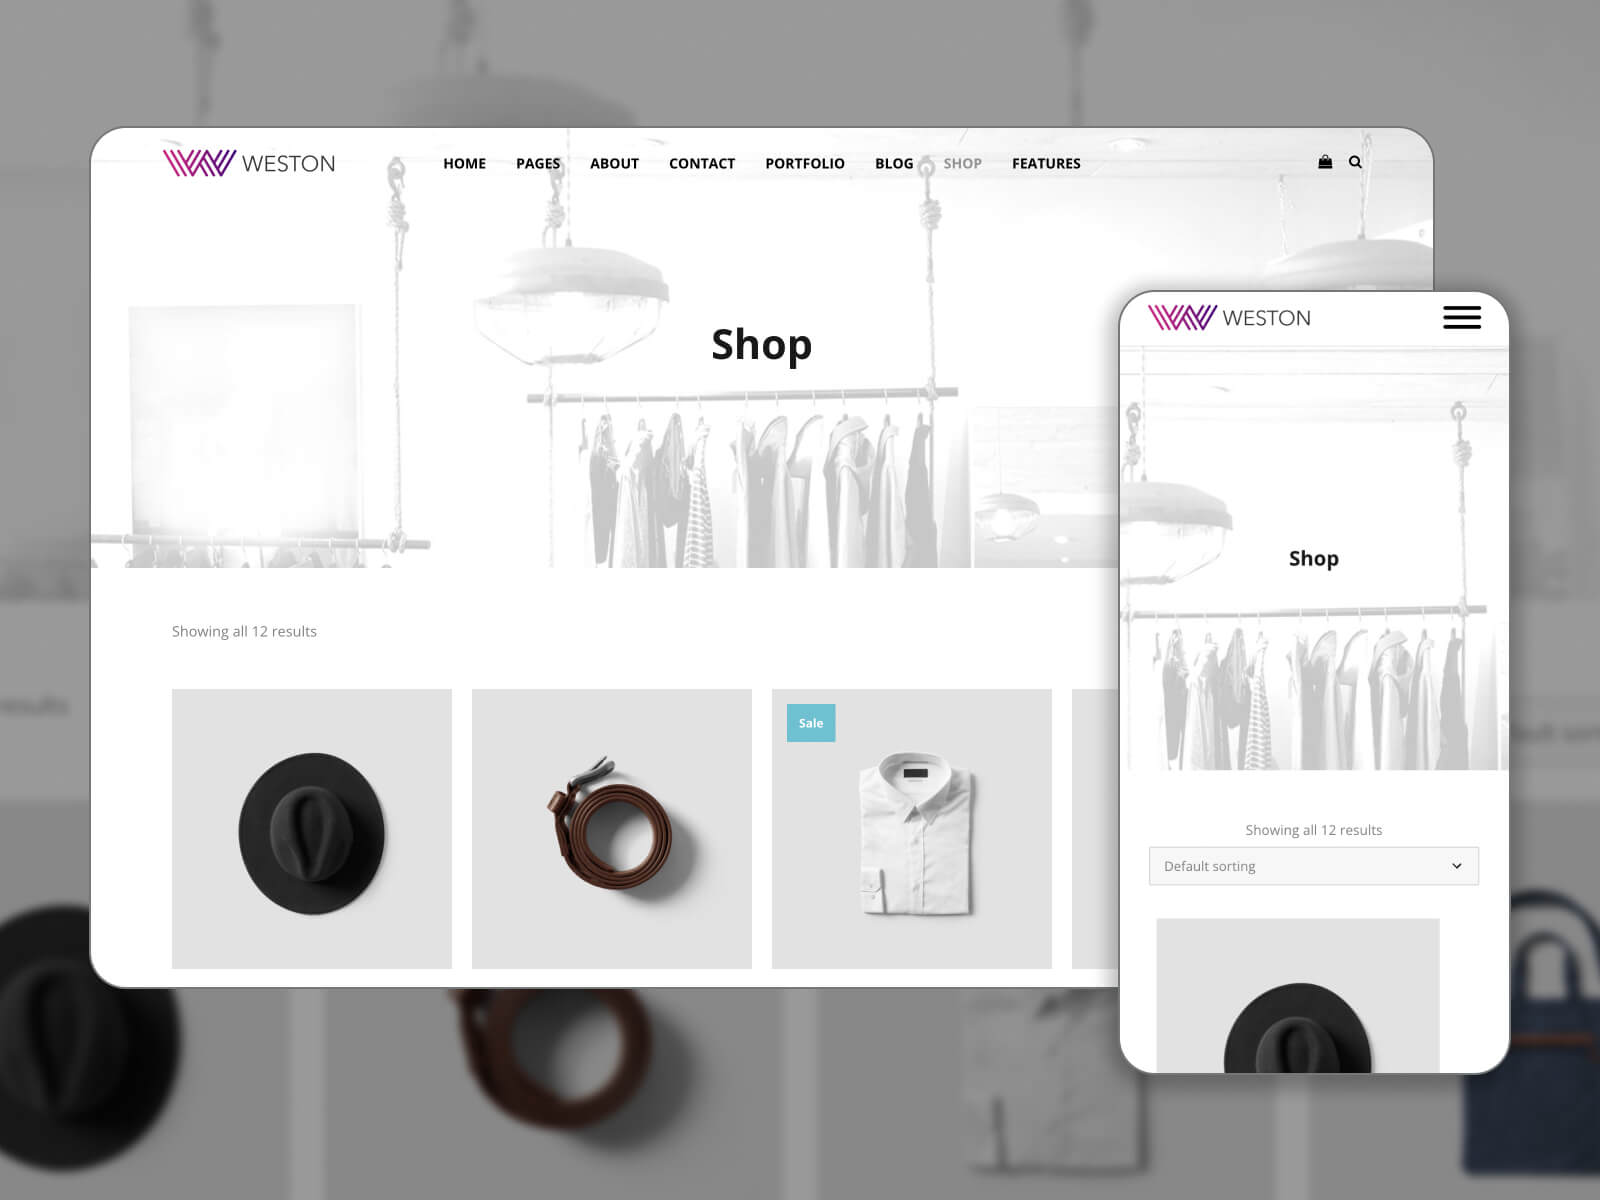 Snapshot of Weston - WooCommerce-enabled WordPress theme for modern art enthusiasts in darkslategray, gainsboro, white, gray, and darkgray color mix.